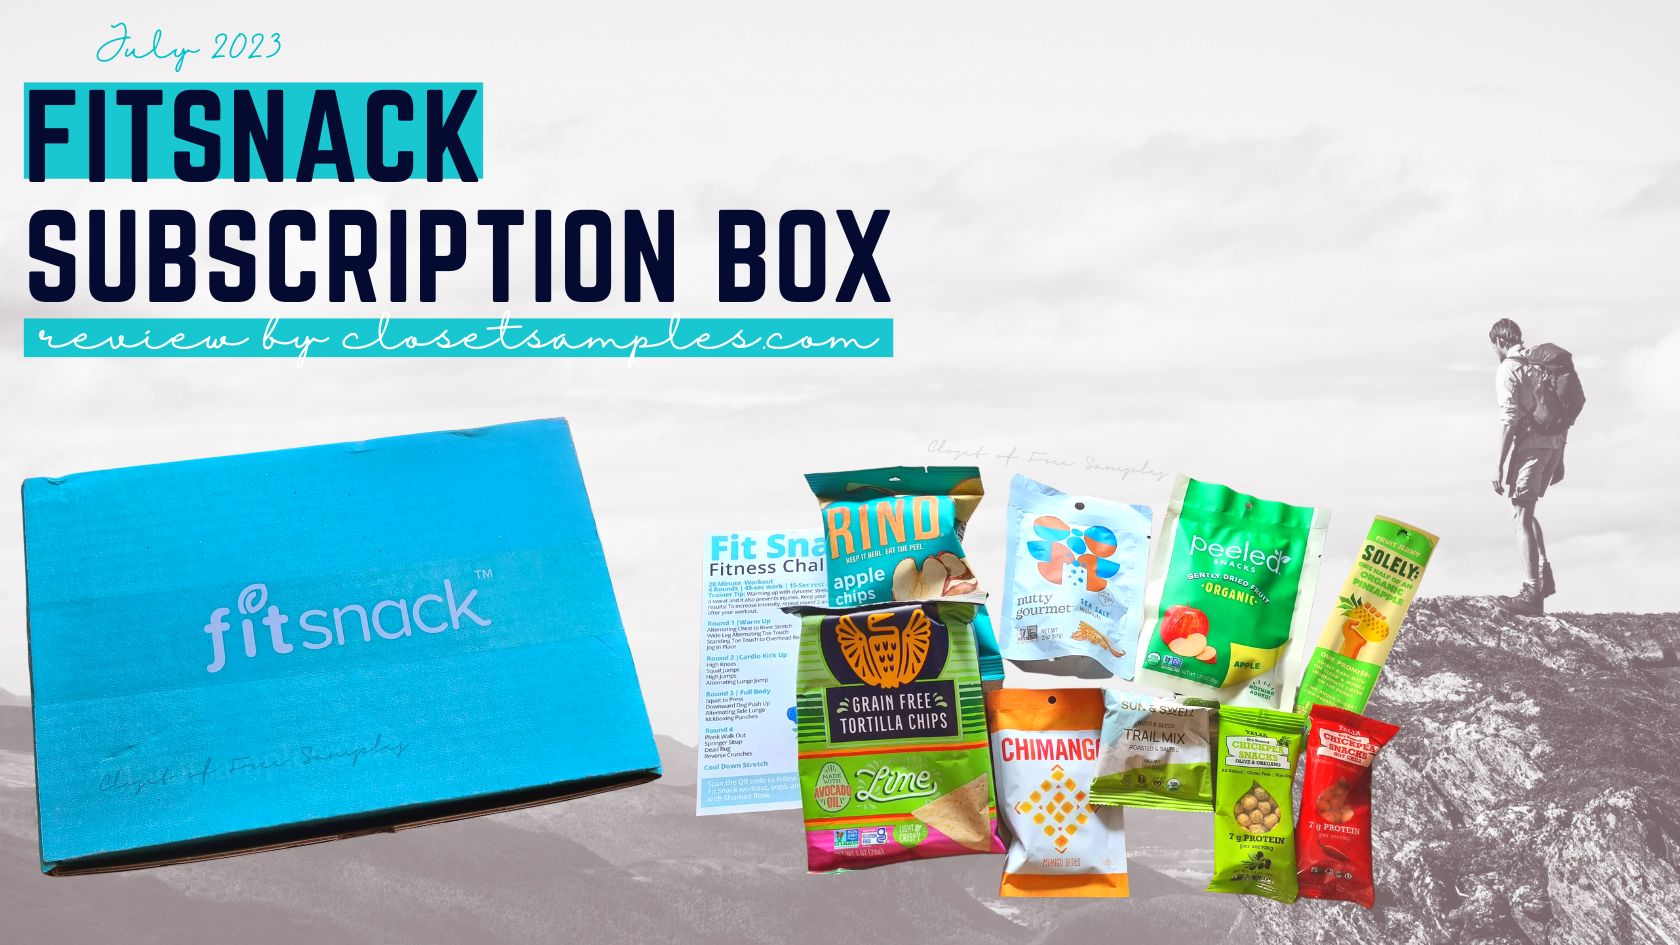 FitSnack Subscription Box July 2023 Review closetsamples